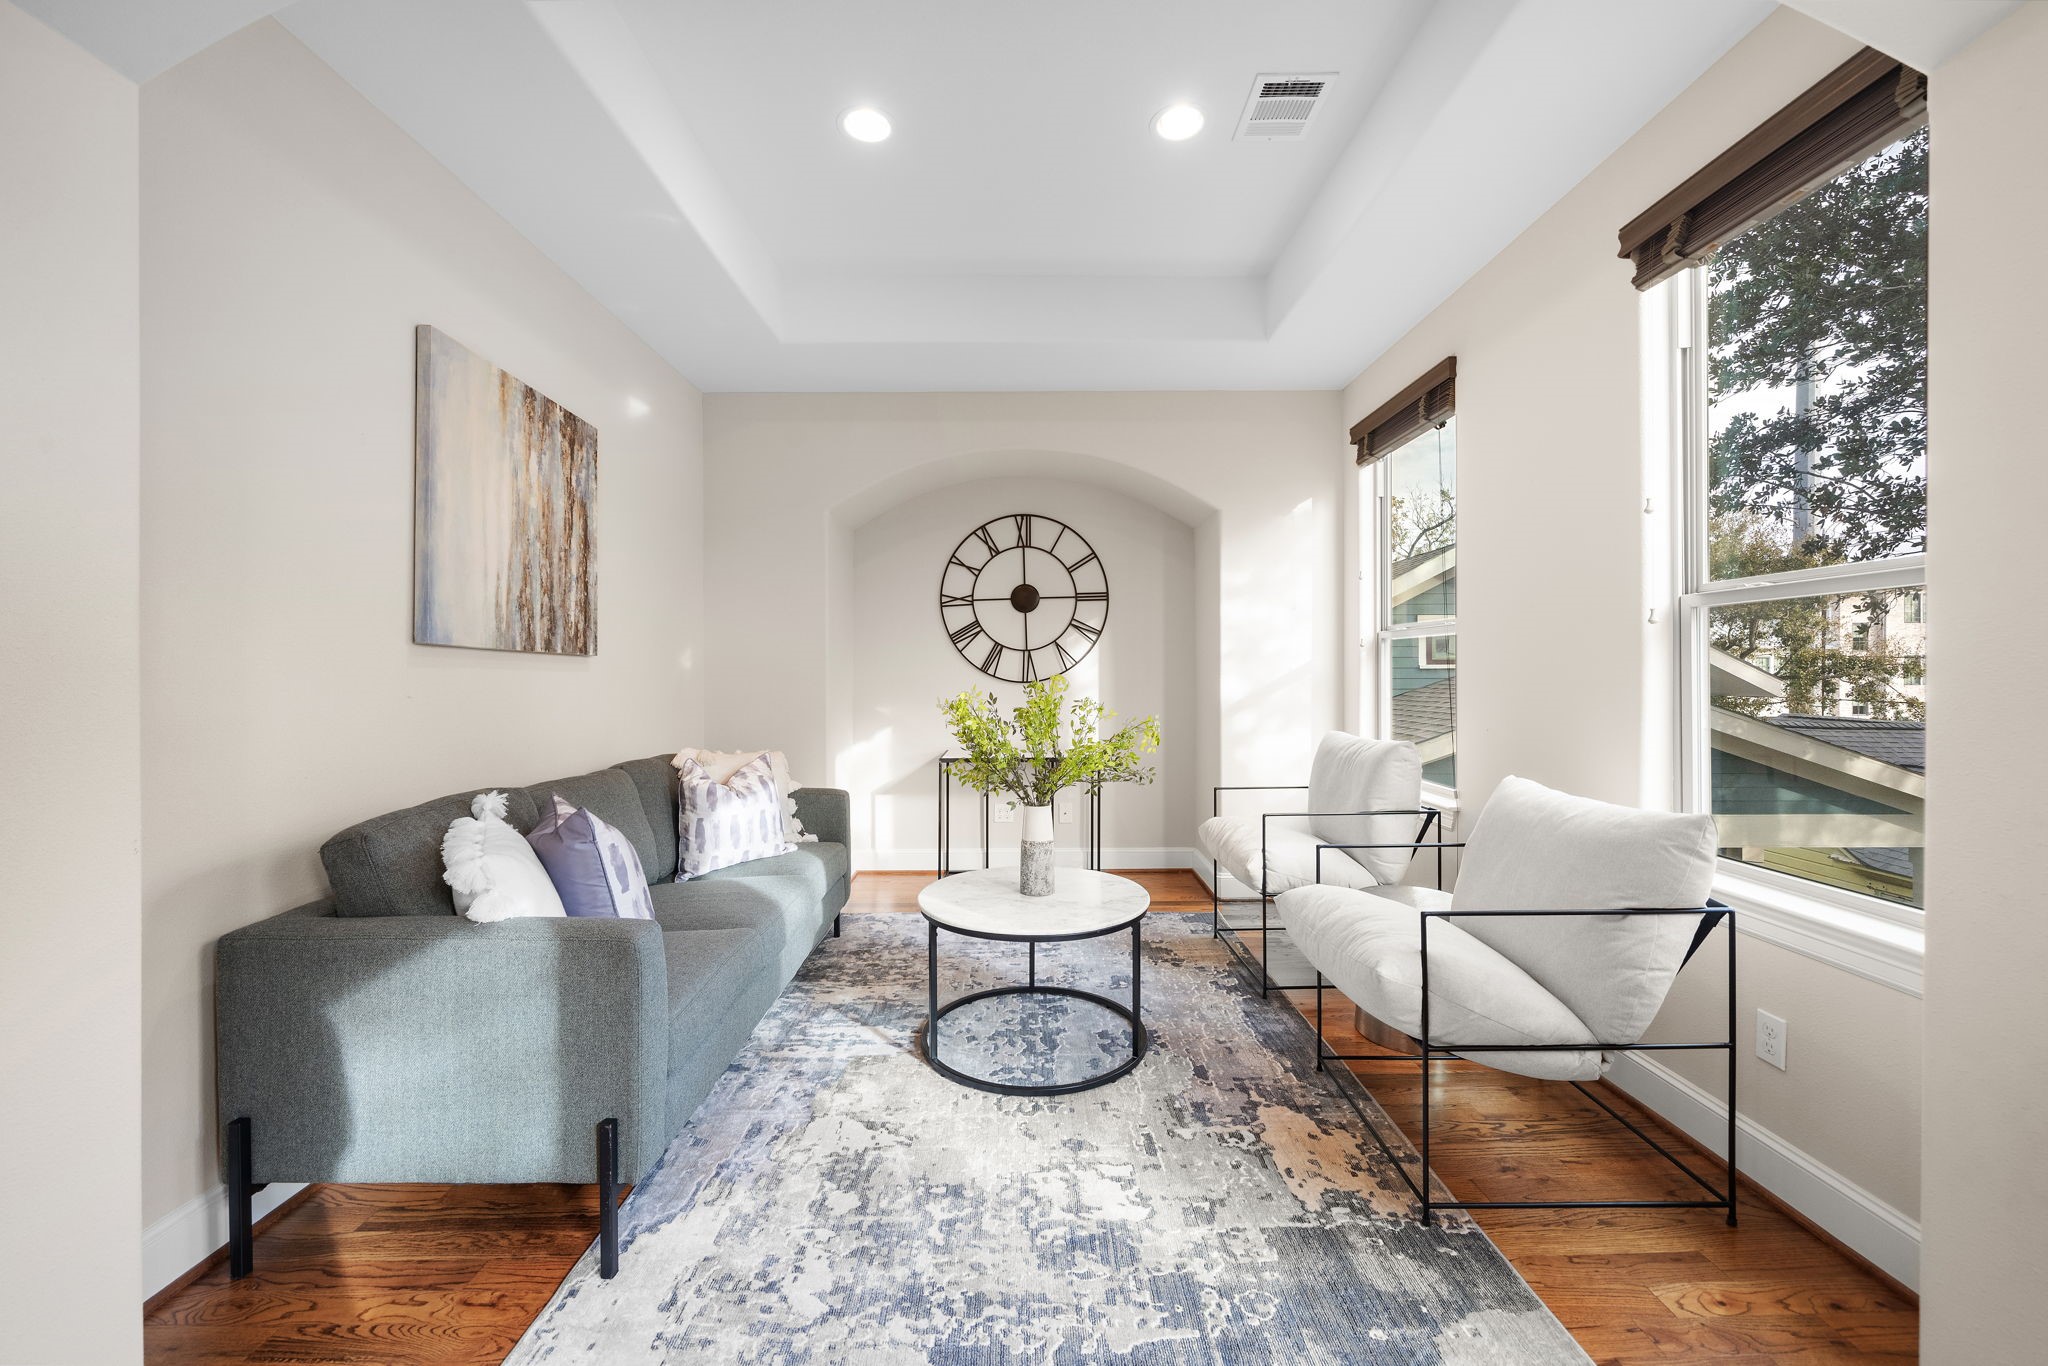 Bright and airy, the primary suite's seating area showcases tray ceilings, a stylish arched inlet, hardwood floors, and generous space for multiple seating arrangements.